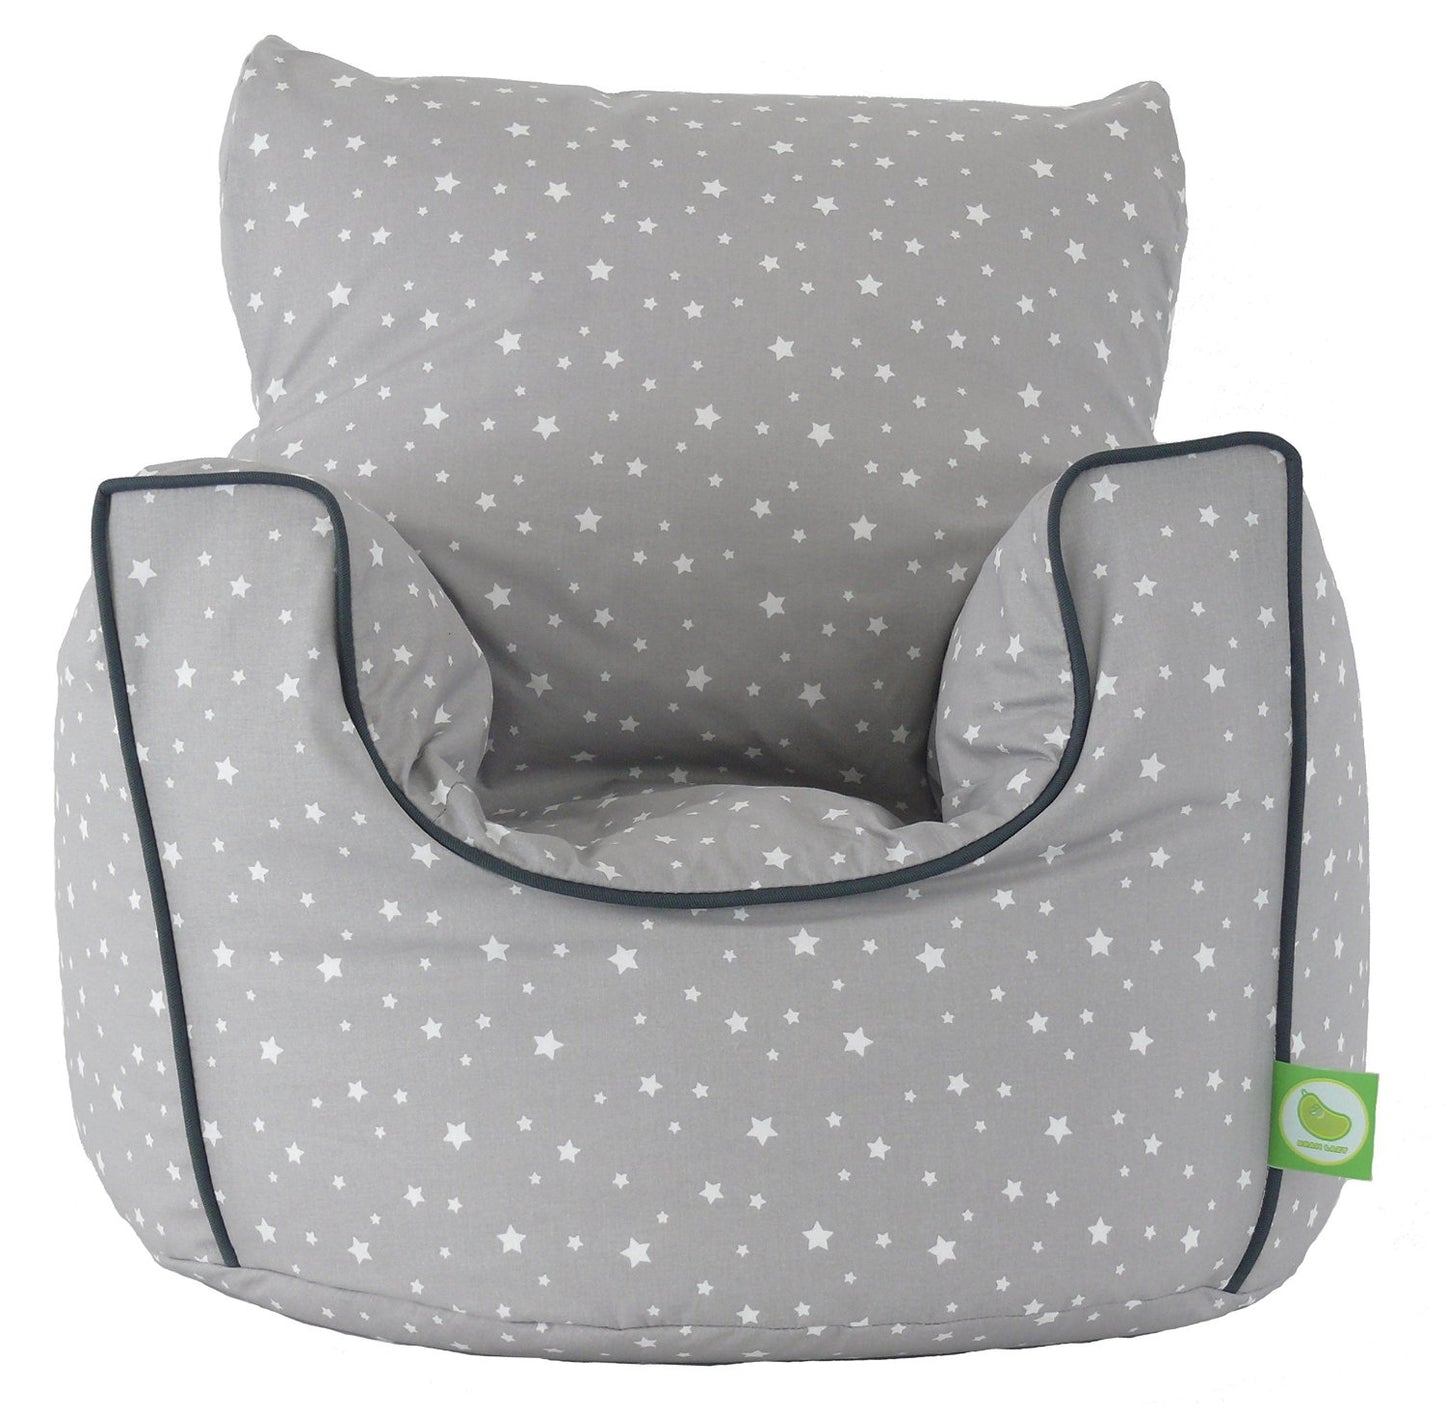 Cotton Grey Stars Bean Bag Arm Chair with Beans Child / Teen size